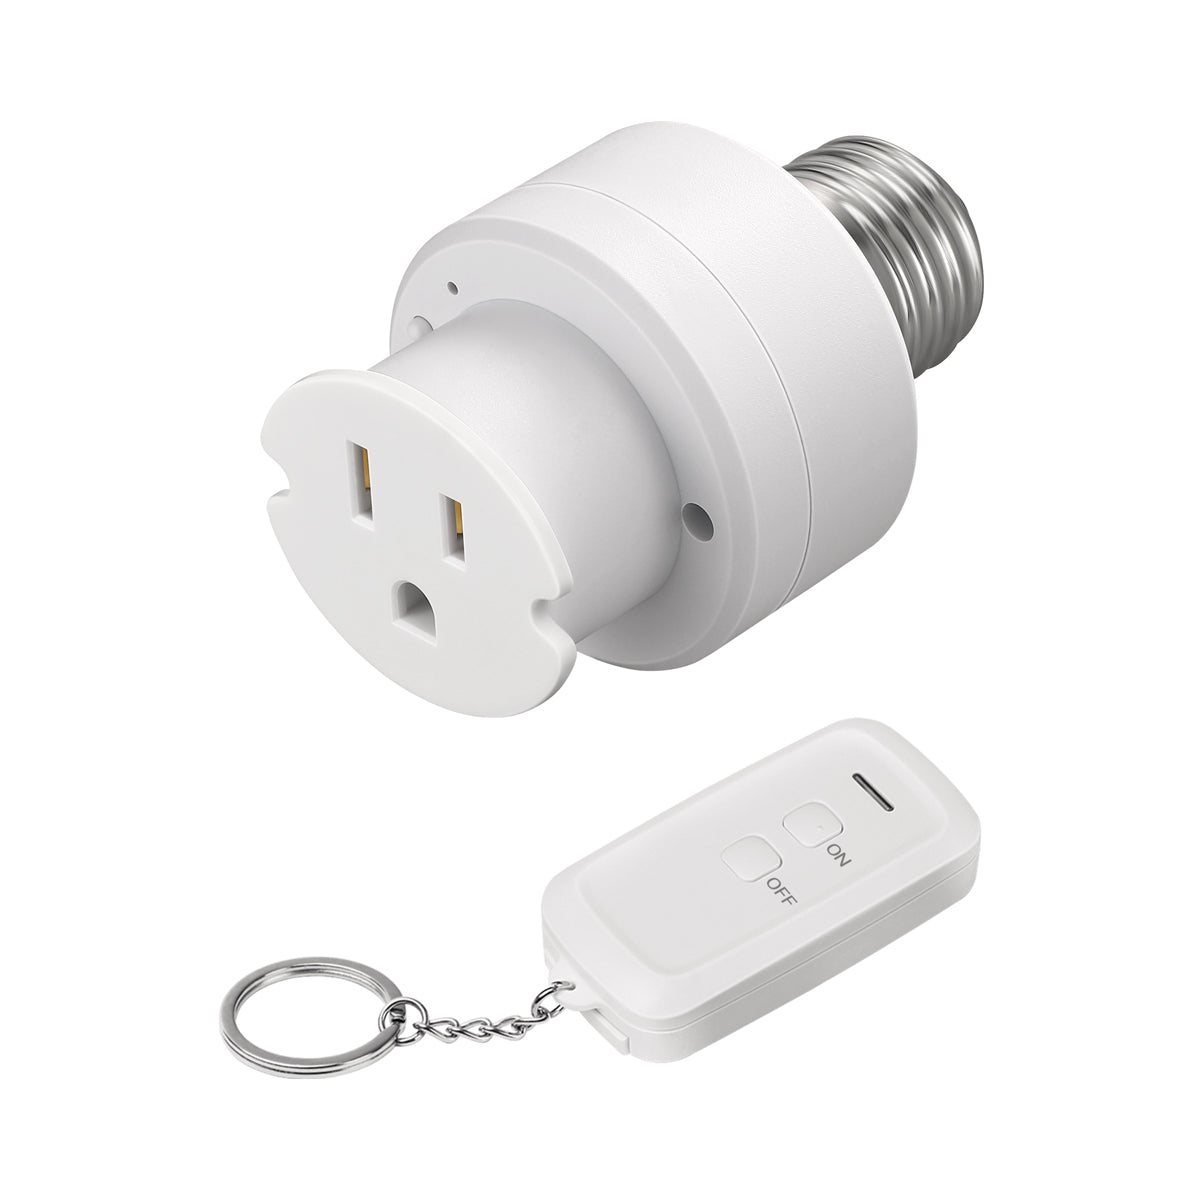 DEWENWILS 3 Prong Light Socket to Plug Adapter with 100ft Remote